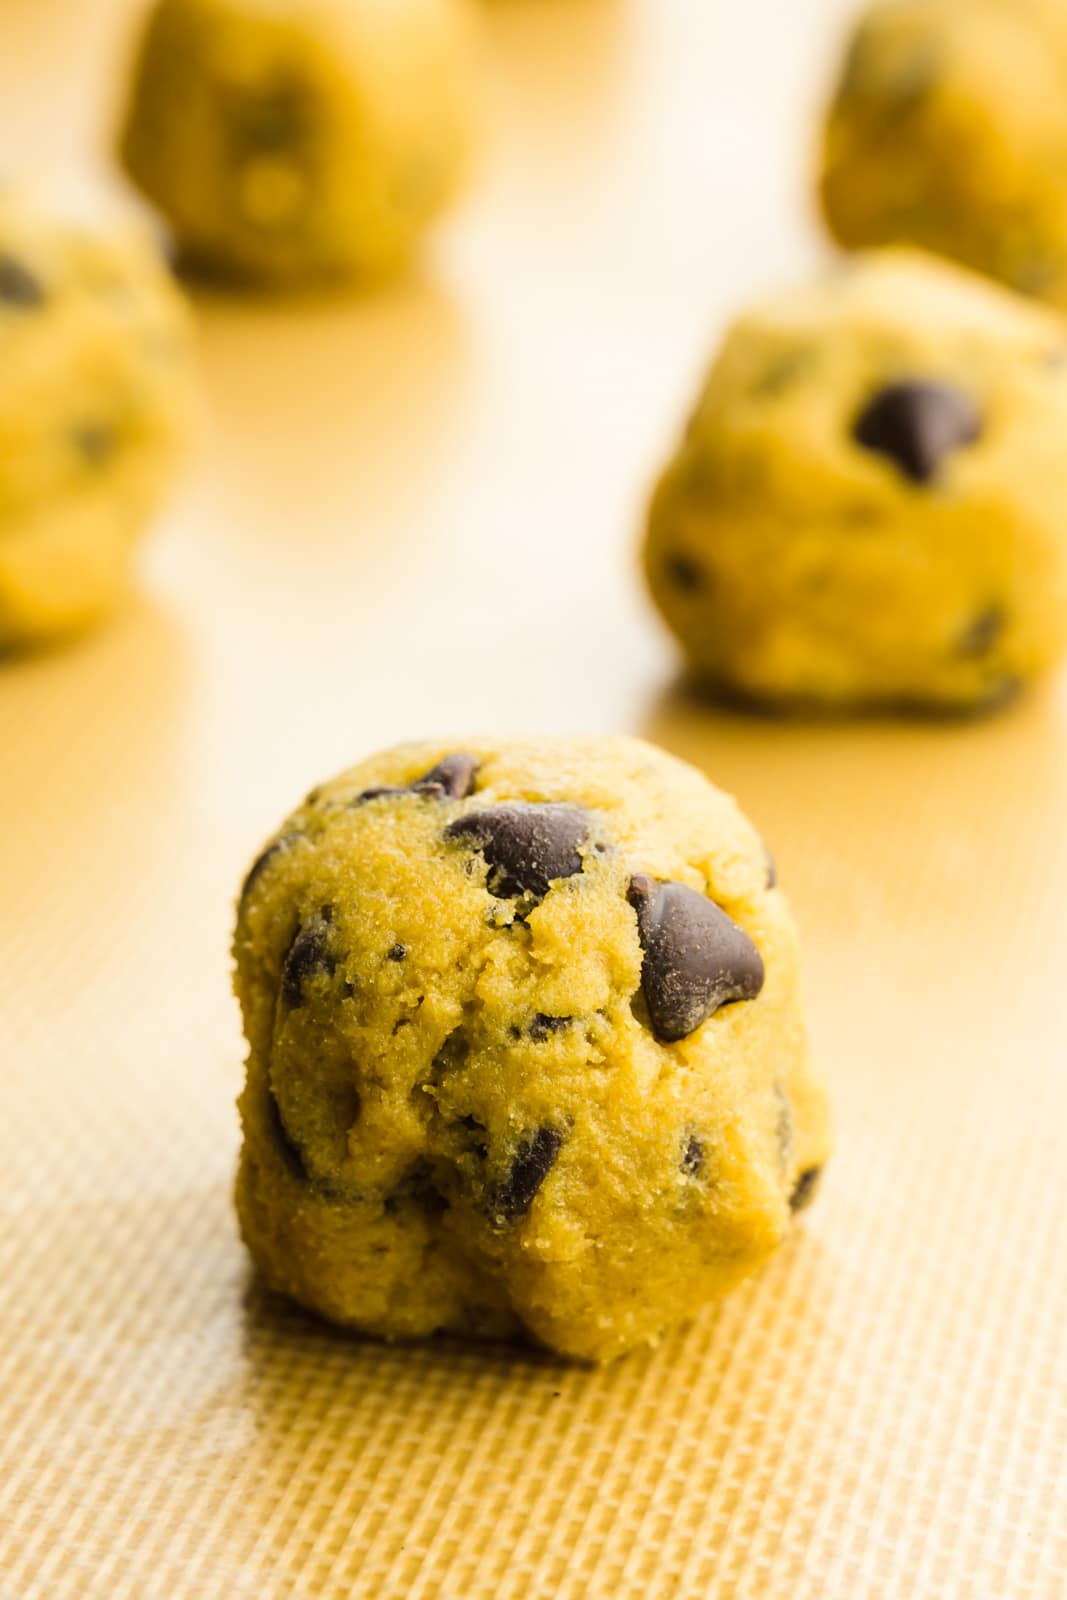 Chocolate chip cookie dough balls are lined up on a baking sheet ready to go into the oven.